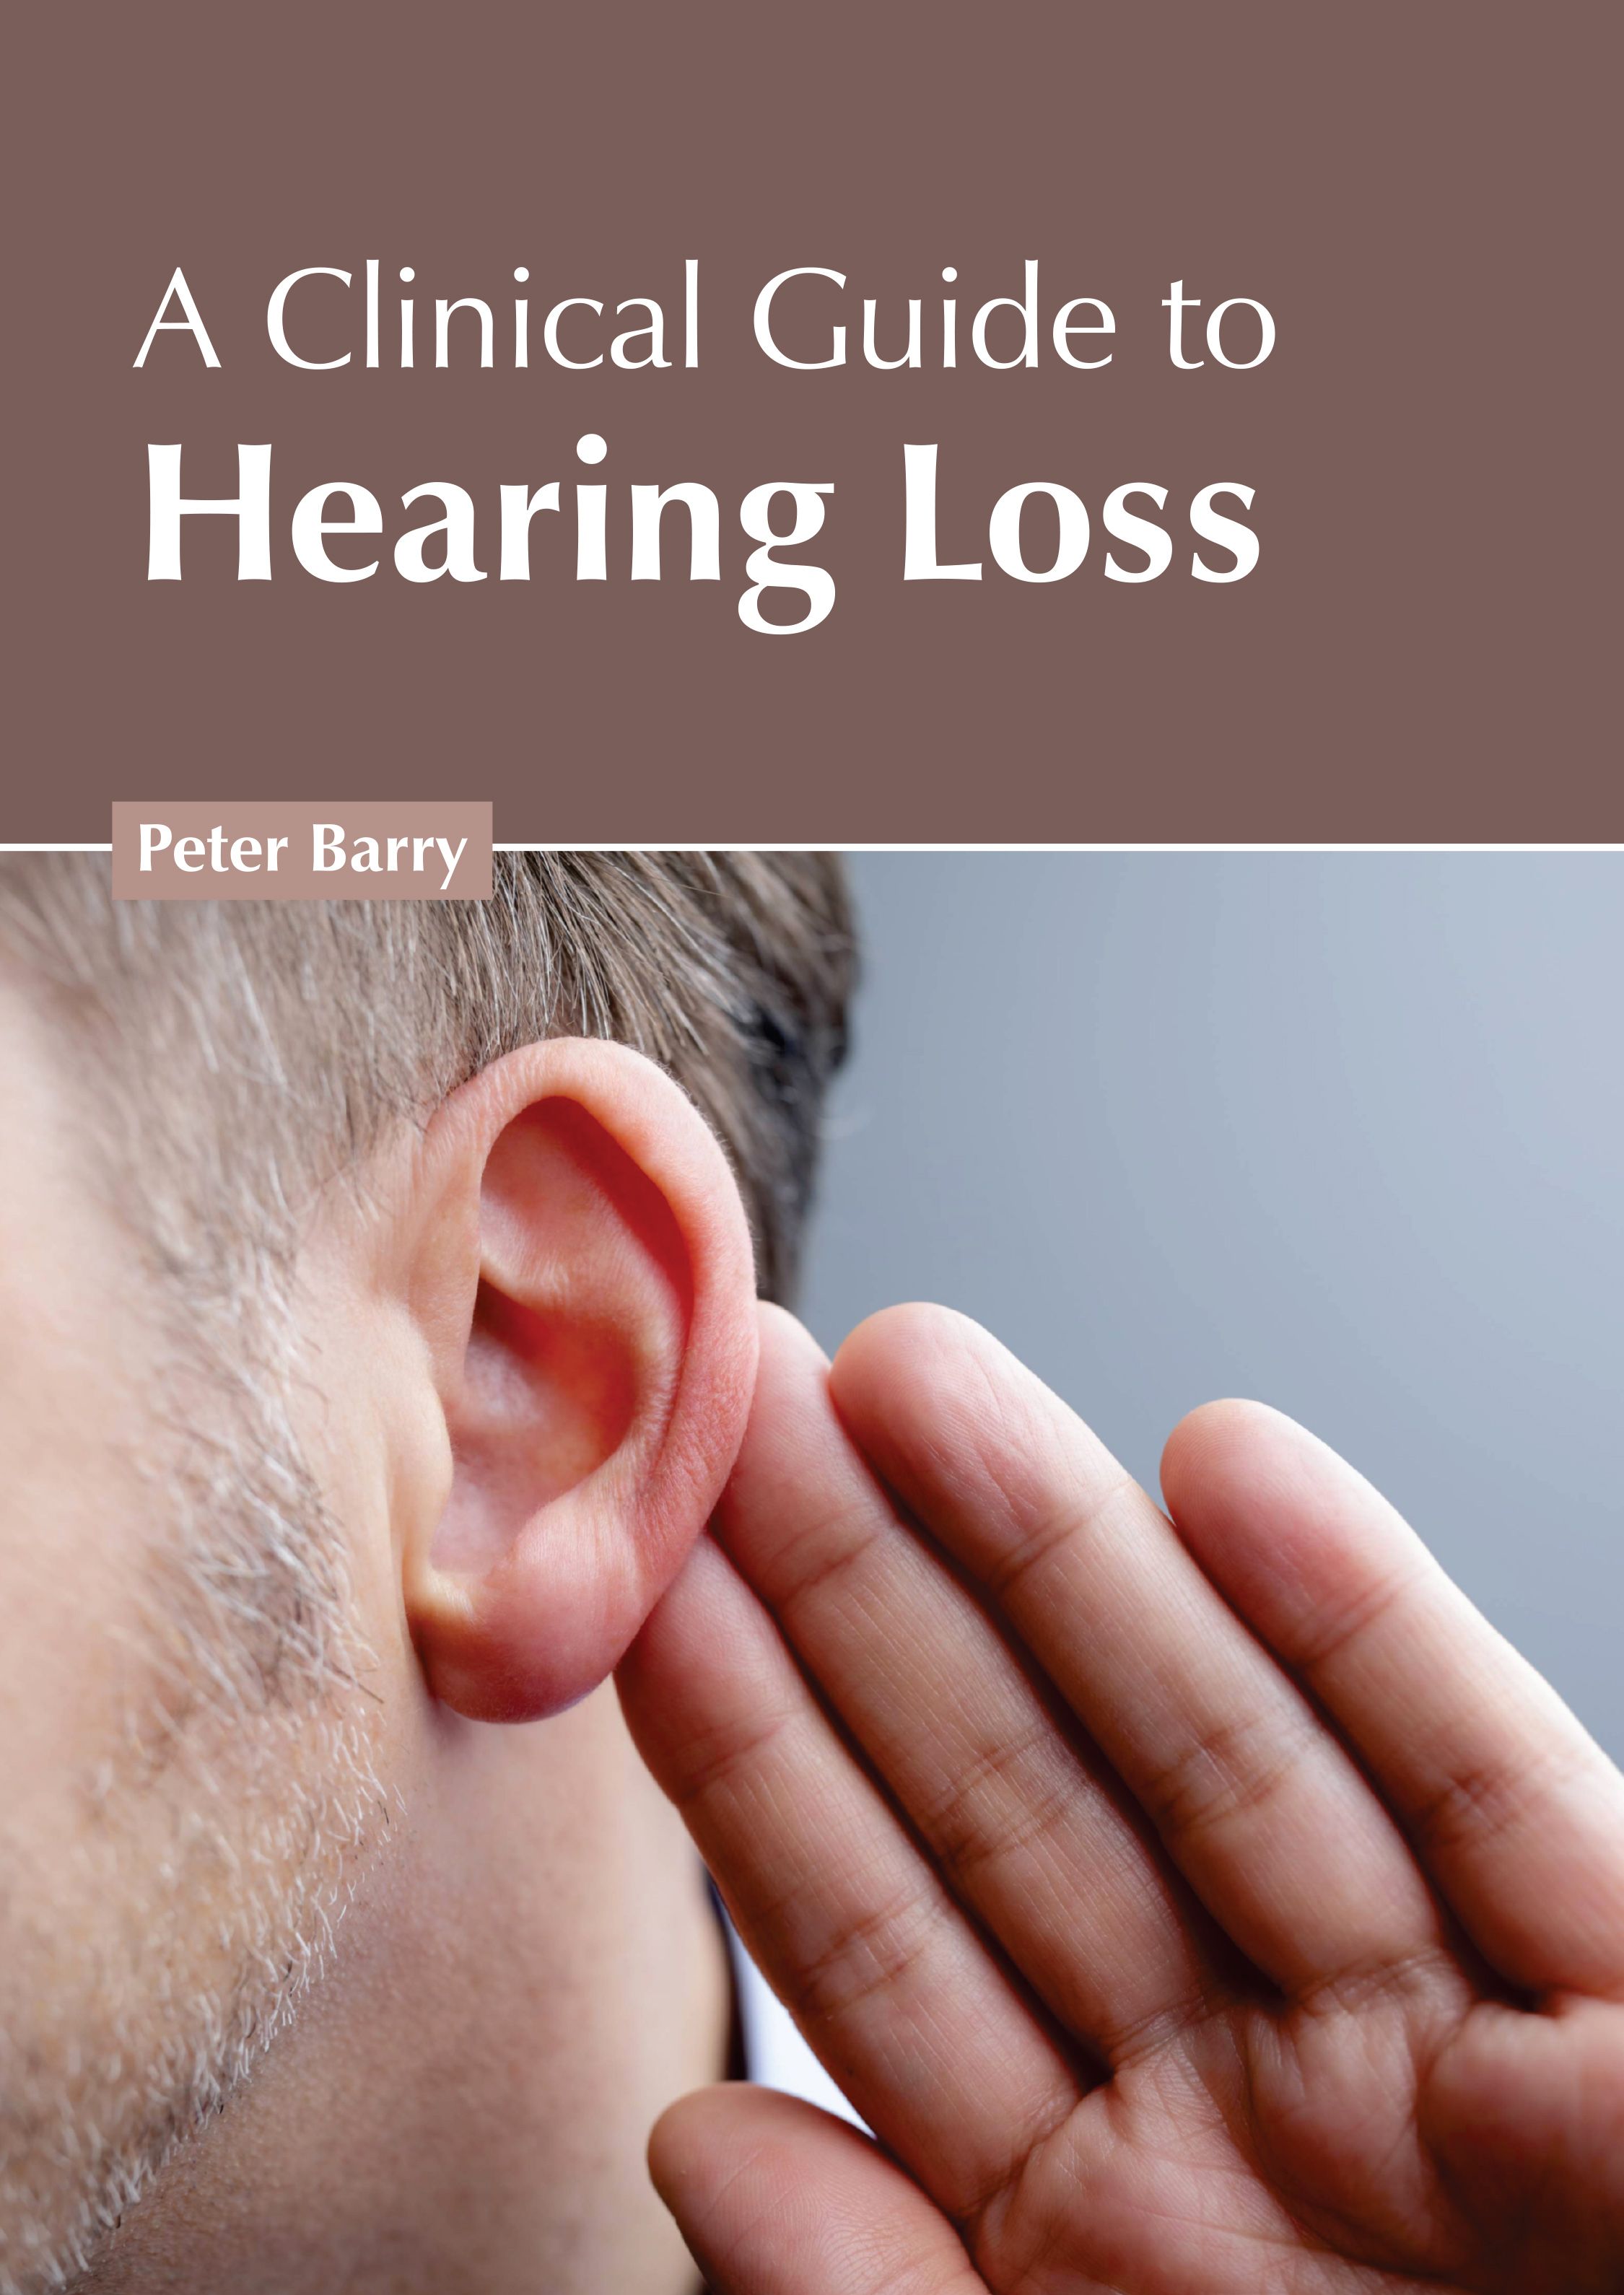 A CLINICAL GUIDE TO HEARING LOSS